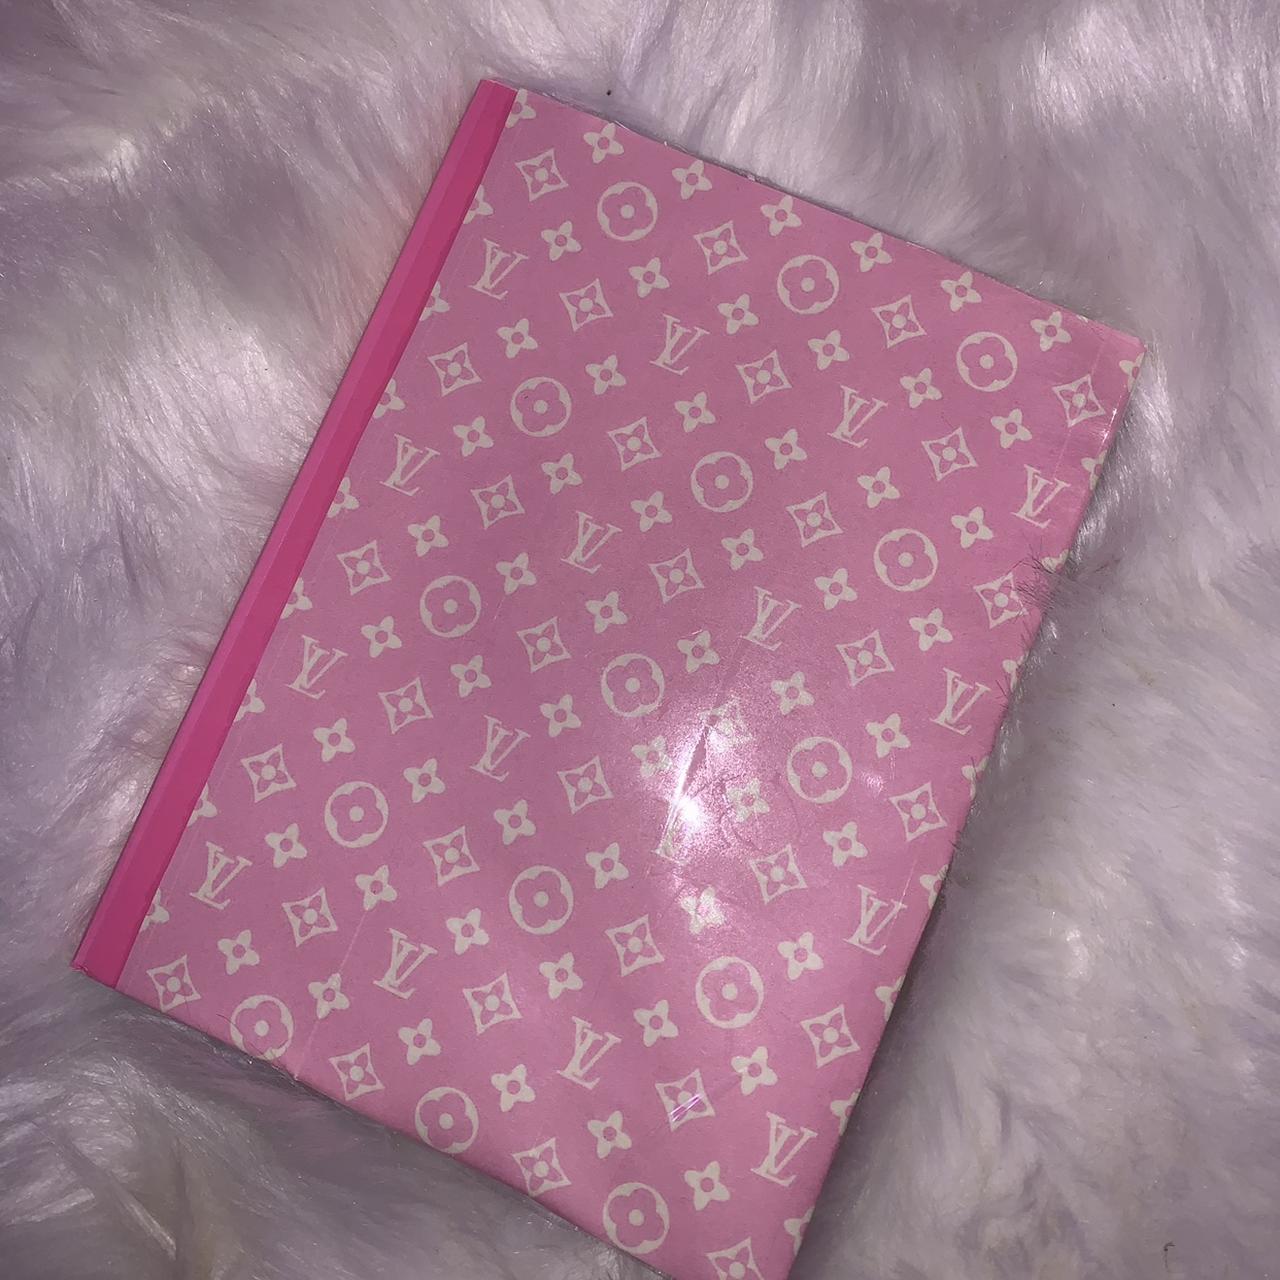 This pink LV paper >>> 😍😍😍💗💗💗 If you love them